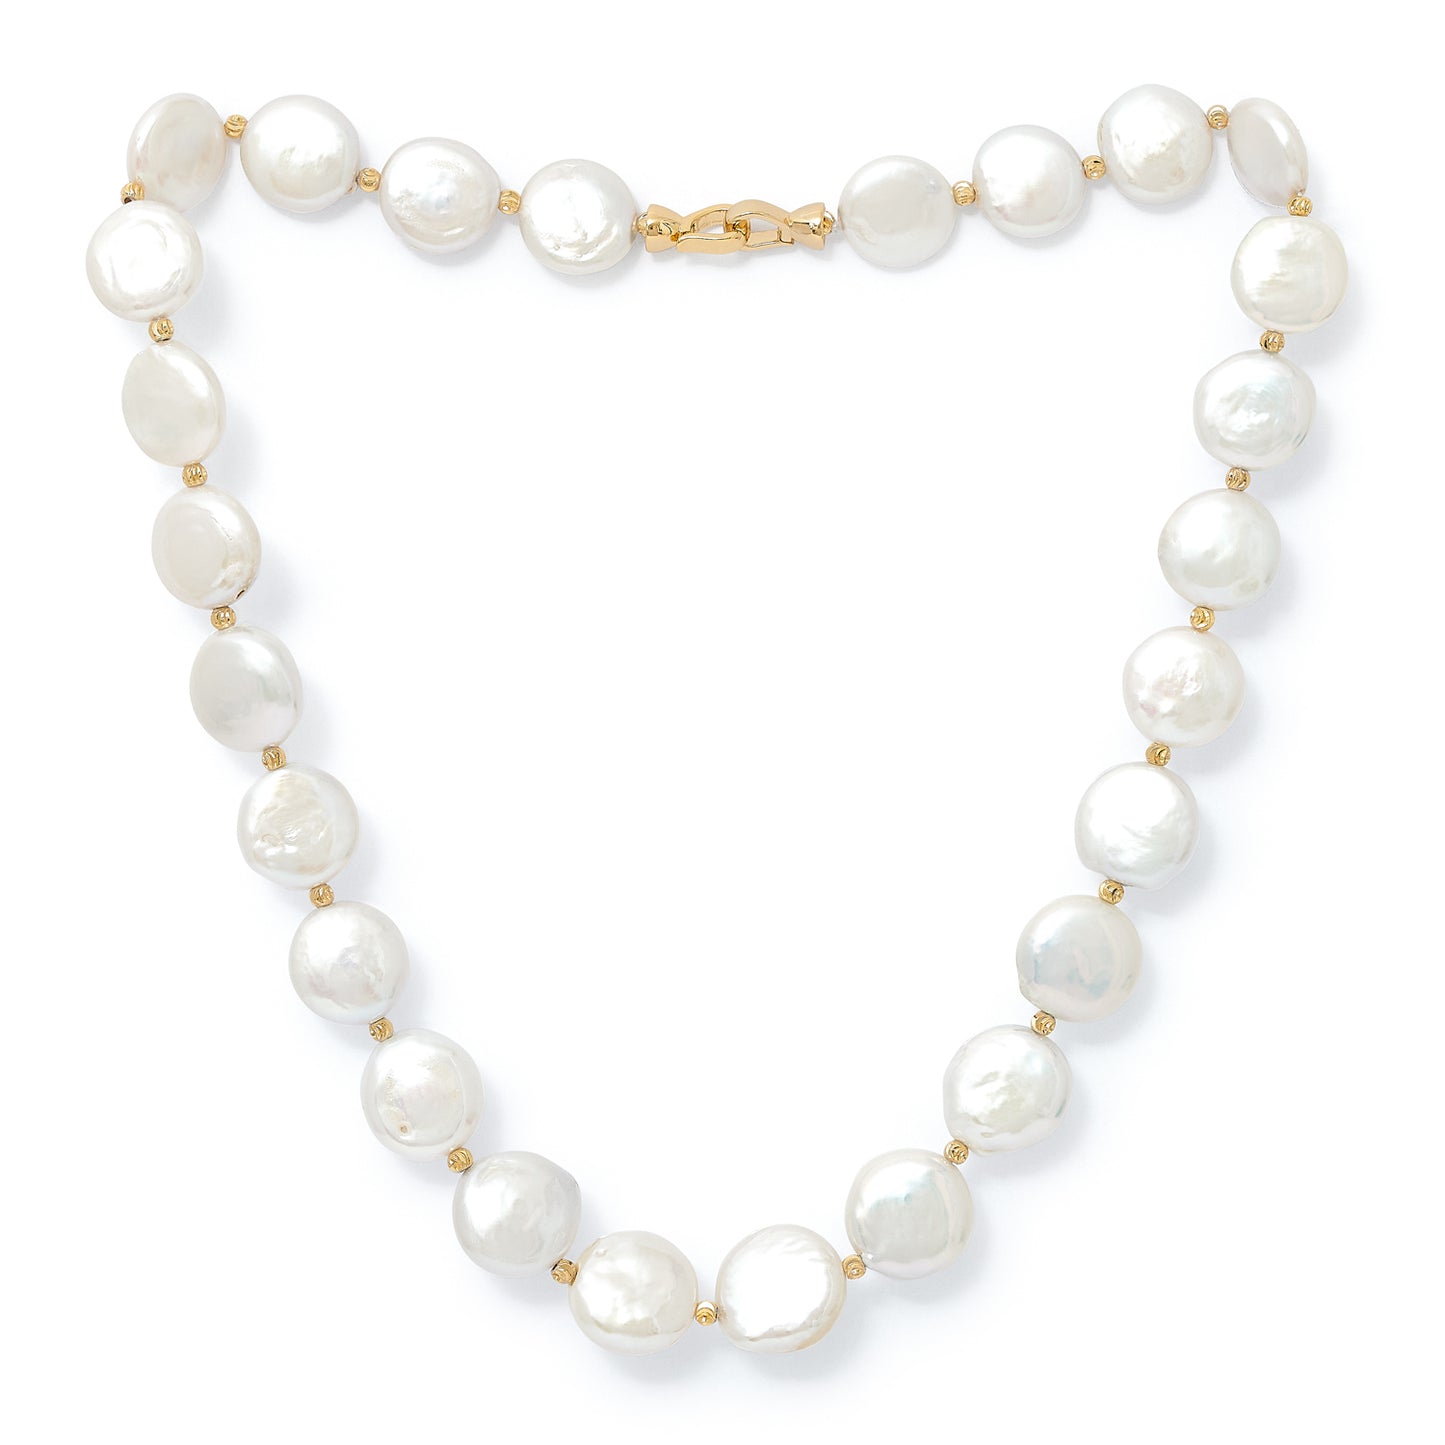 Credo coin cultured freshwater pearl necklace with gold beads